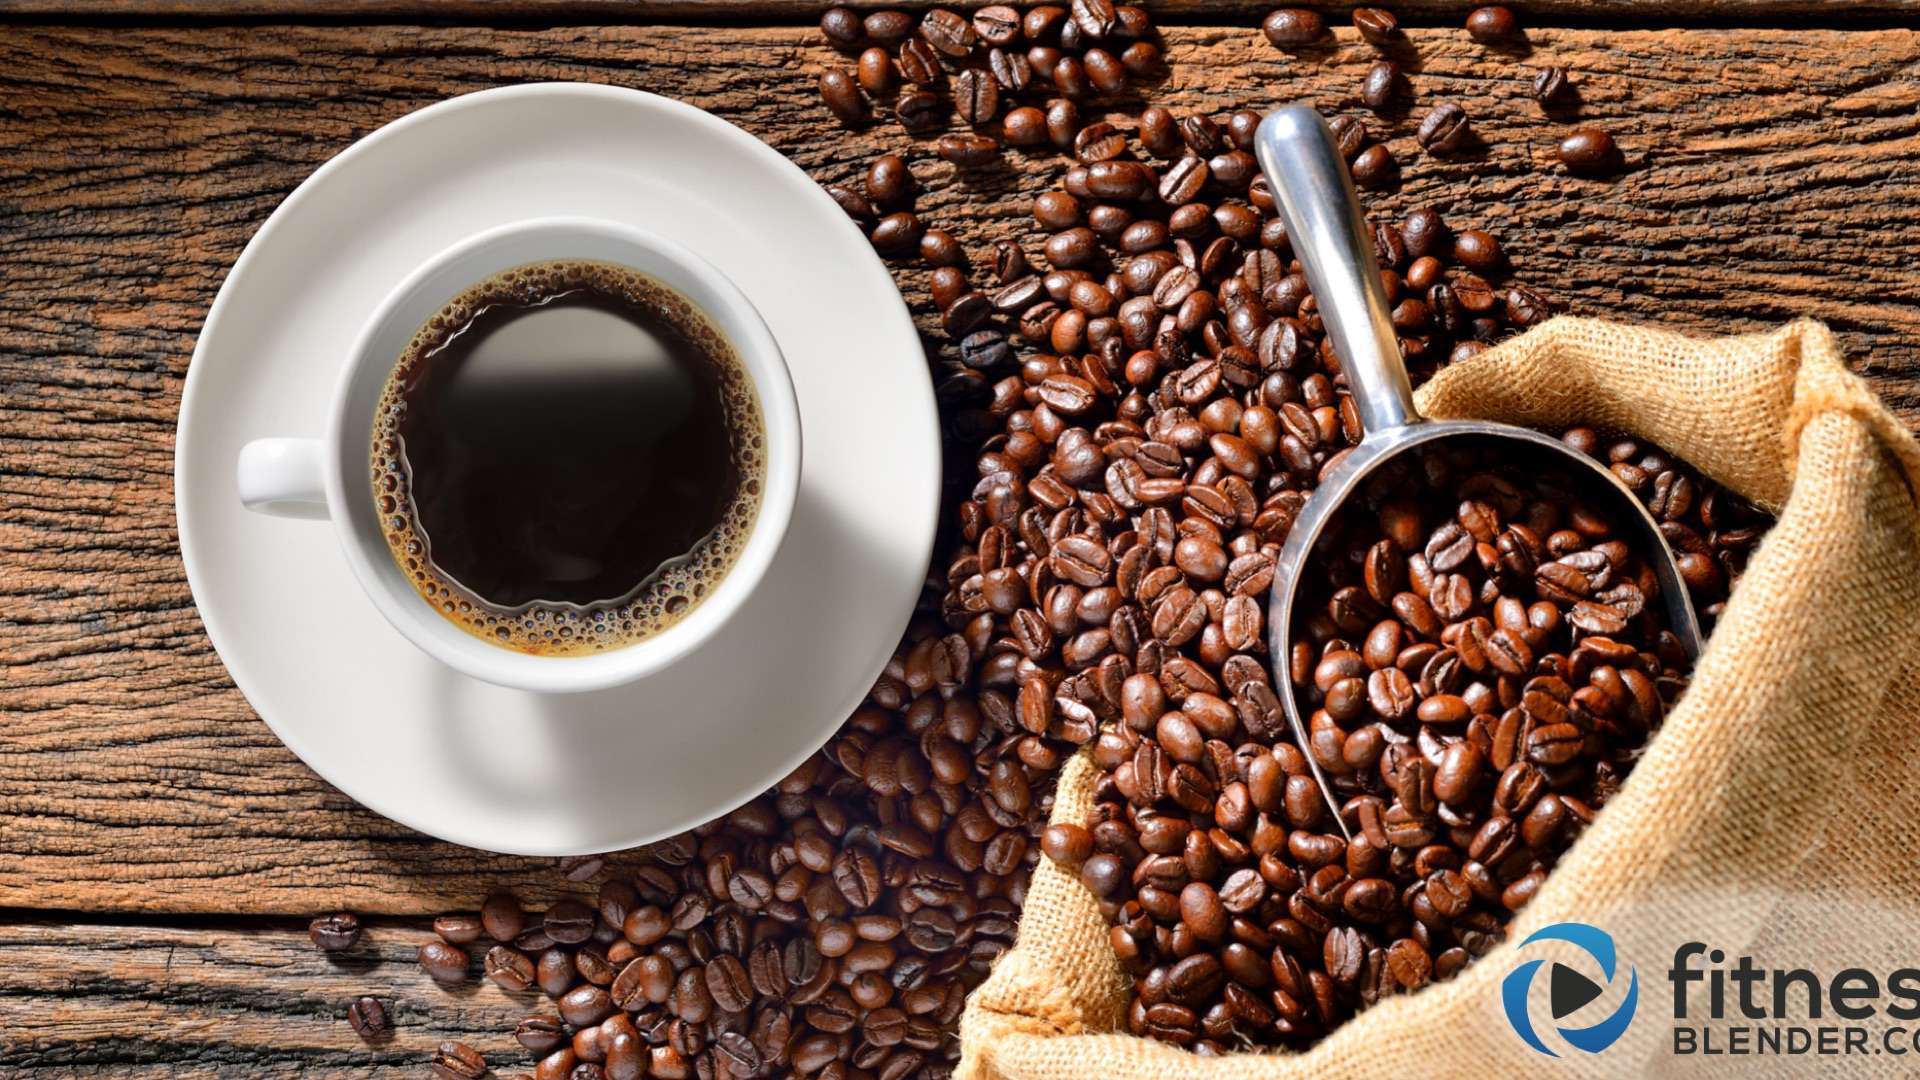 How Does Coffee Impact Weight Loss? Is Coffee Healthy?